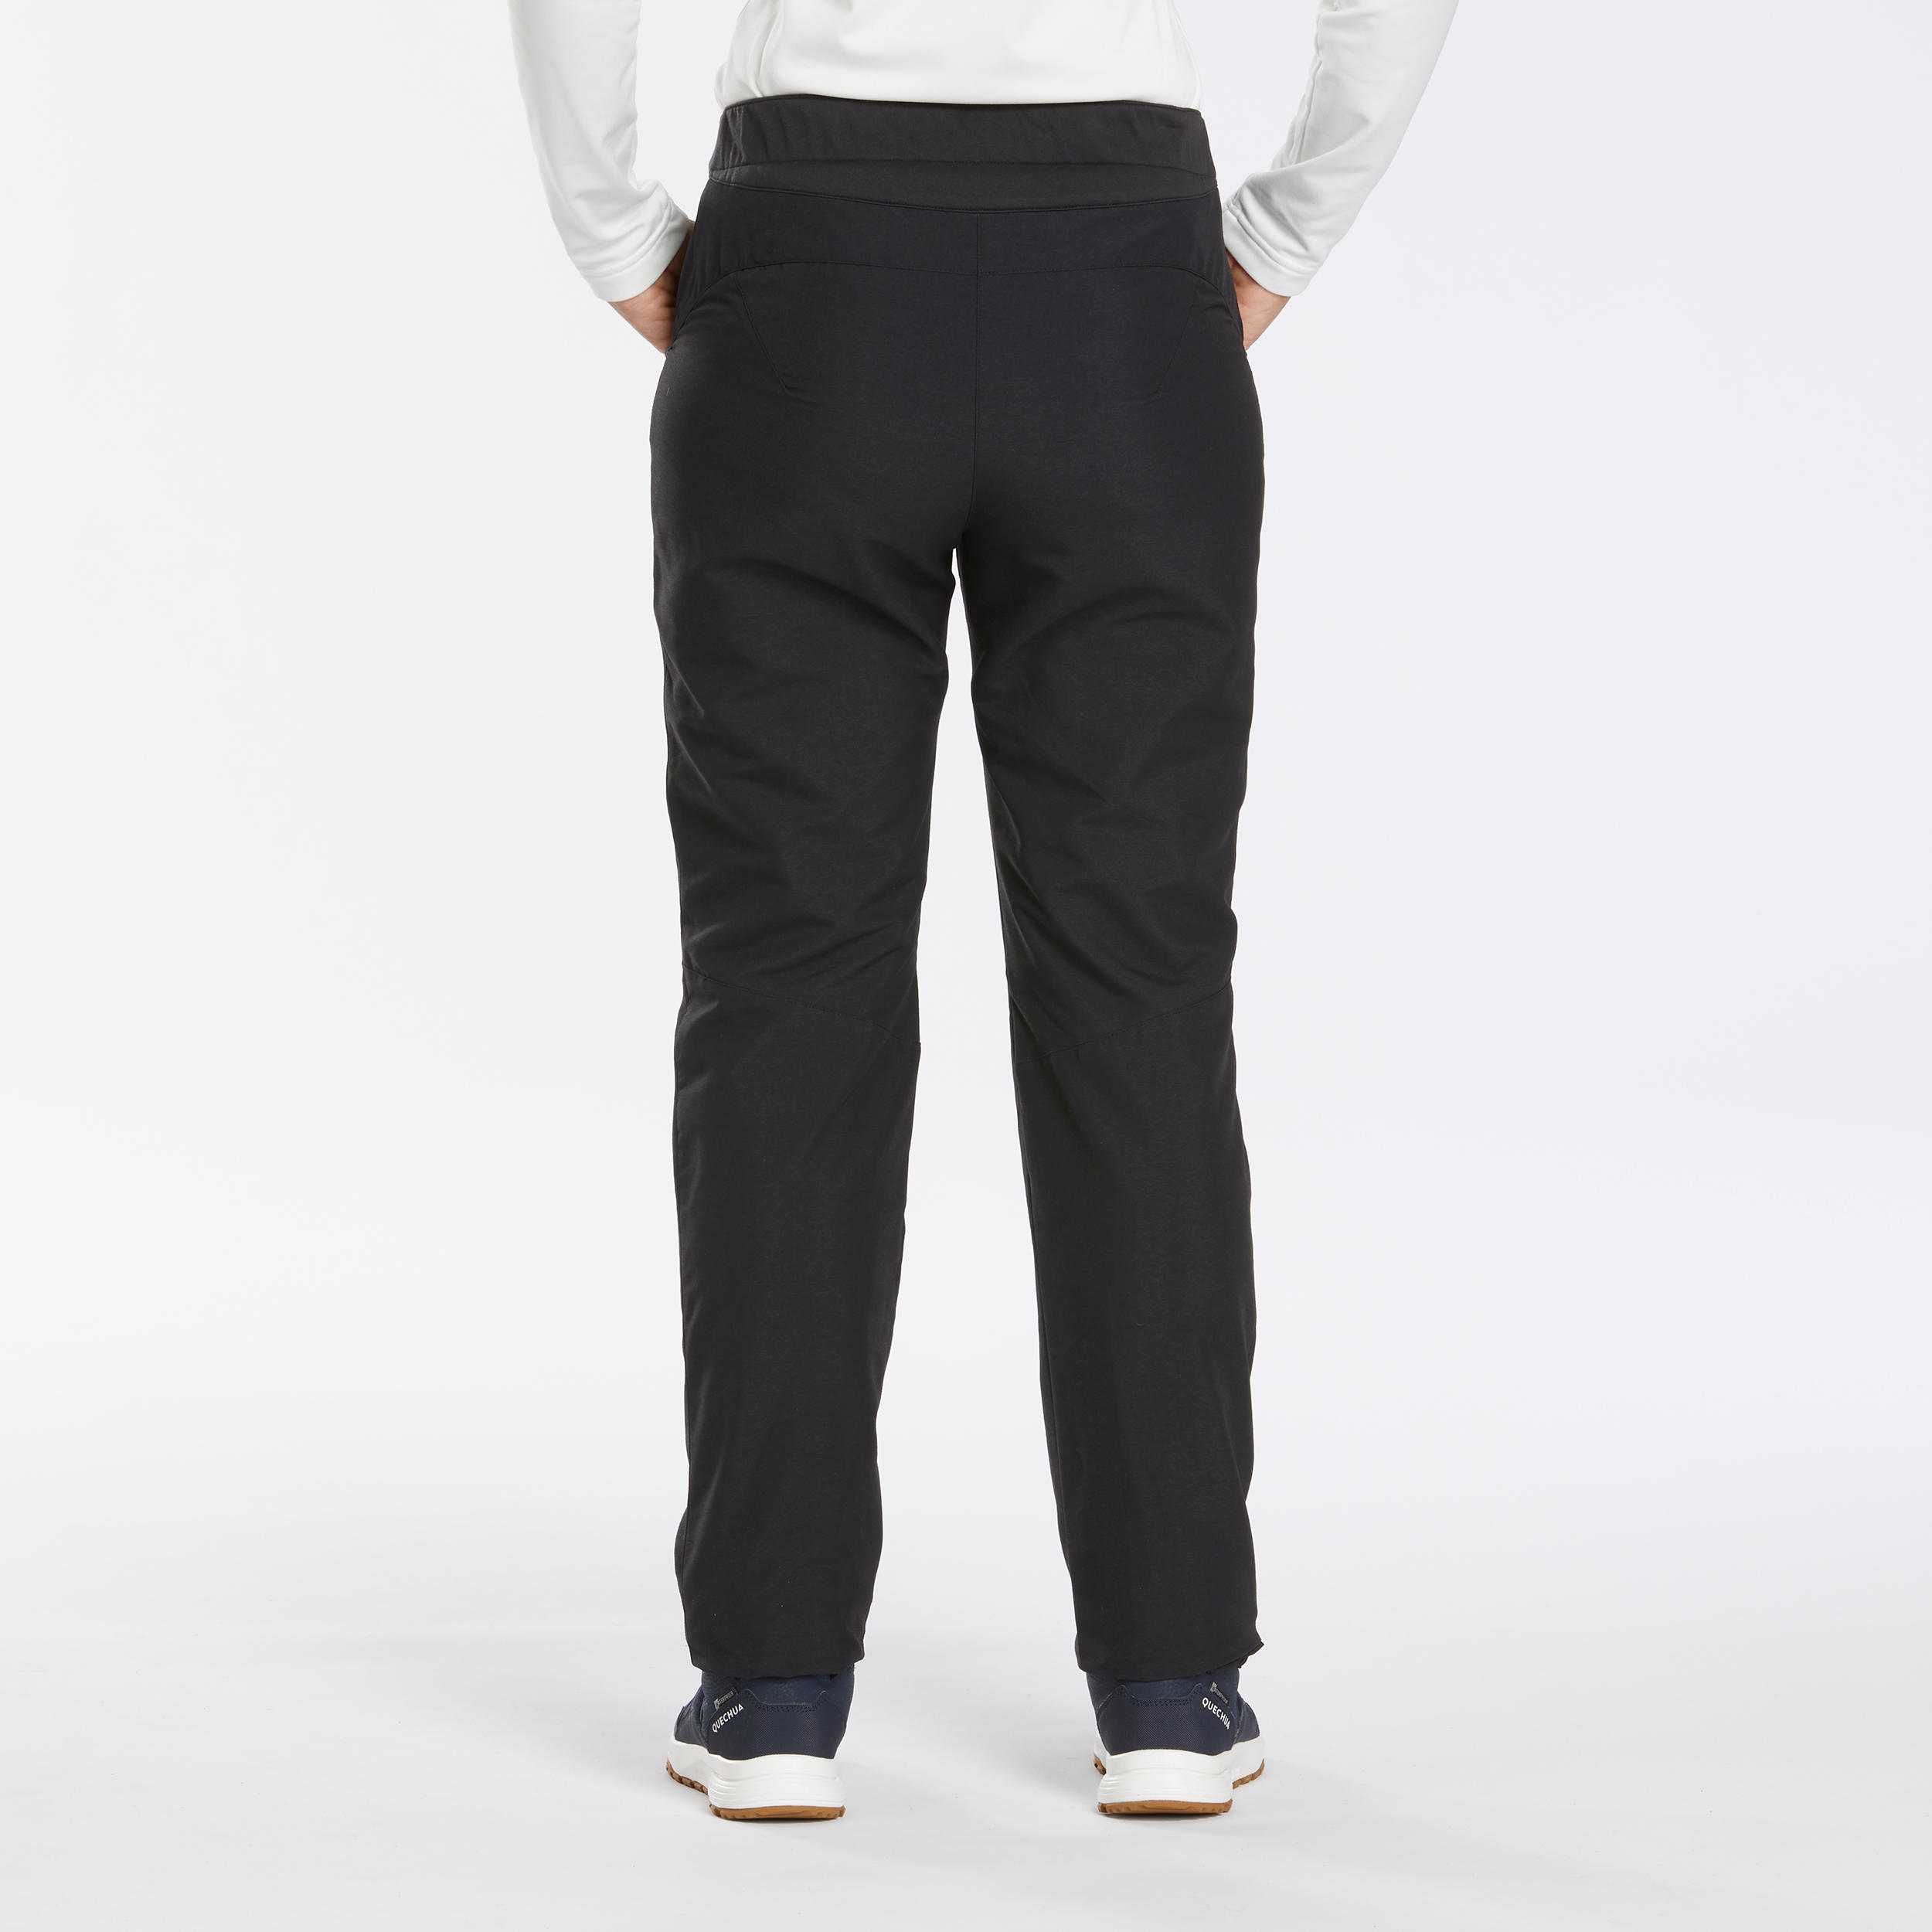 Nike Sportswear Collection Essential MidRise Open Hem Fleece Trousers   Where To Buy  DO7573010  The Sole Supplier